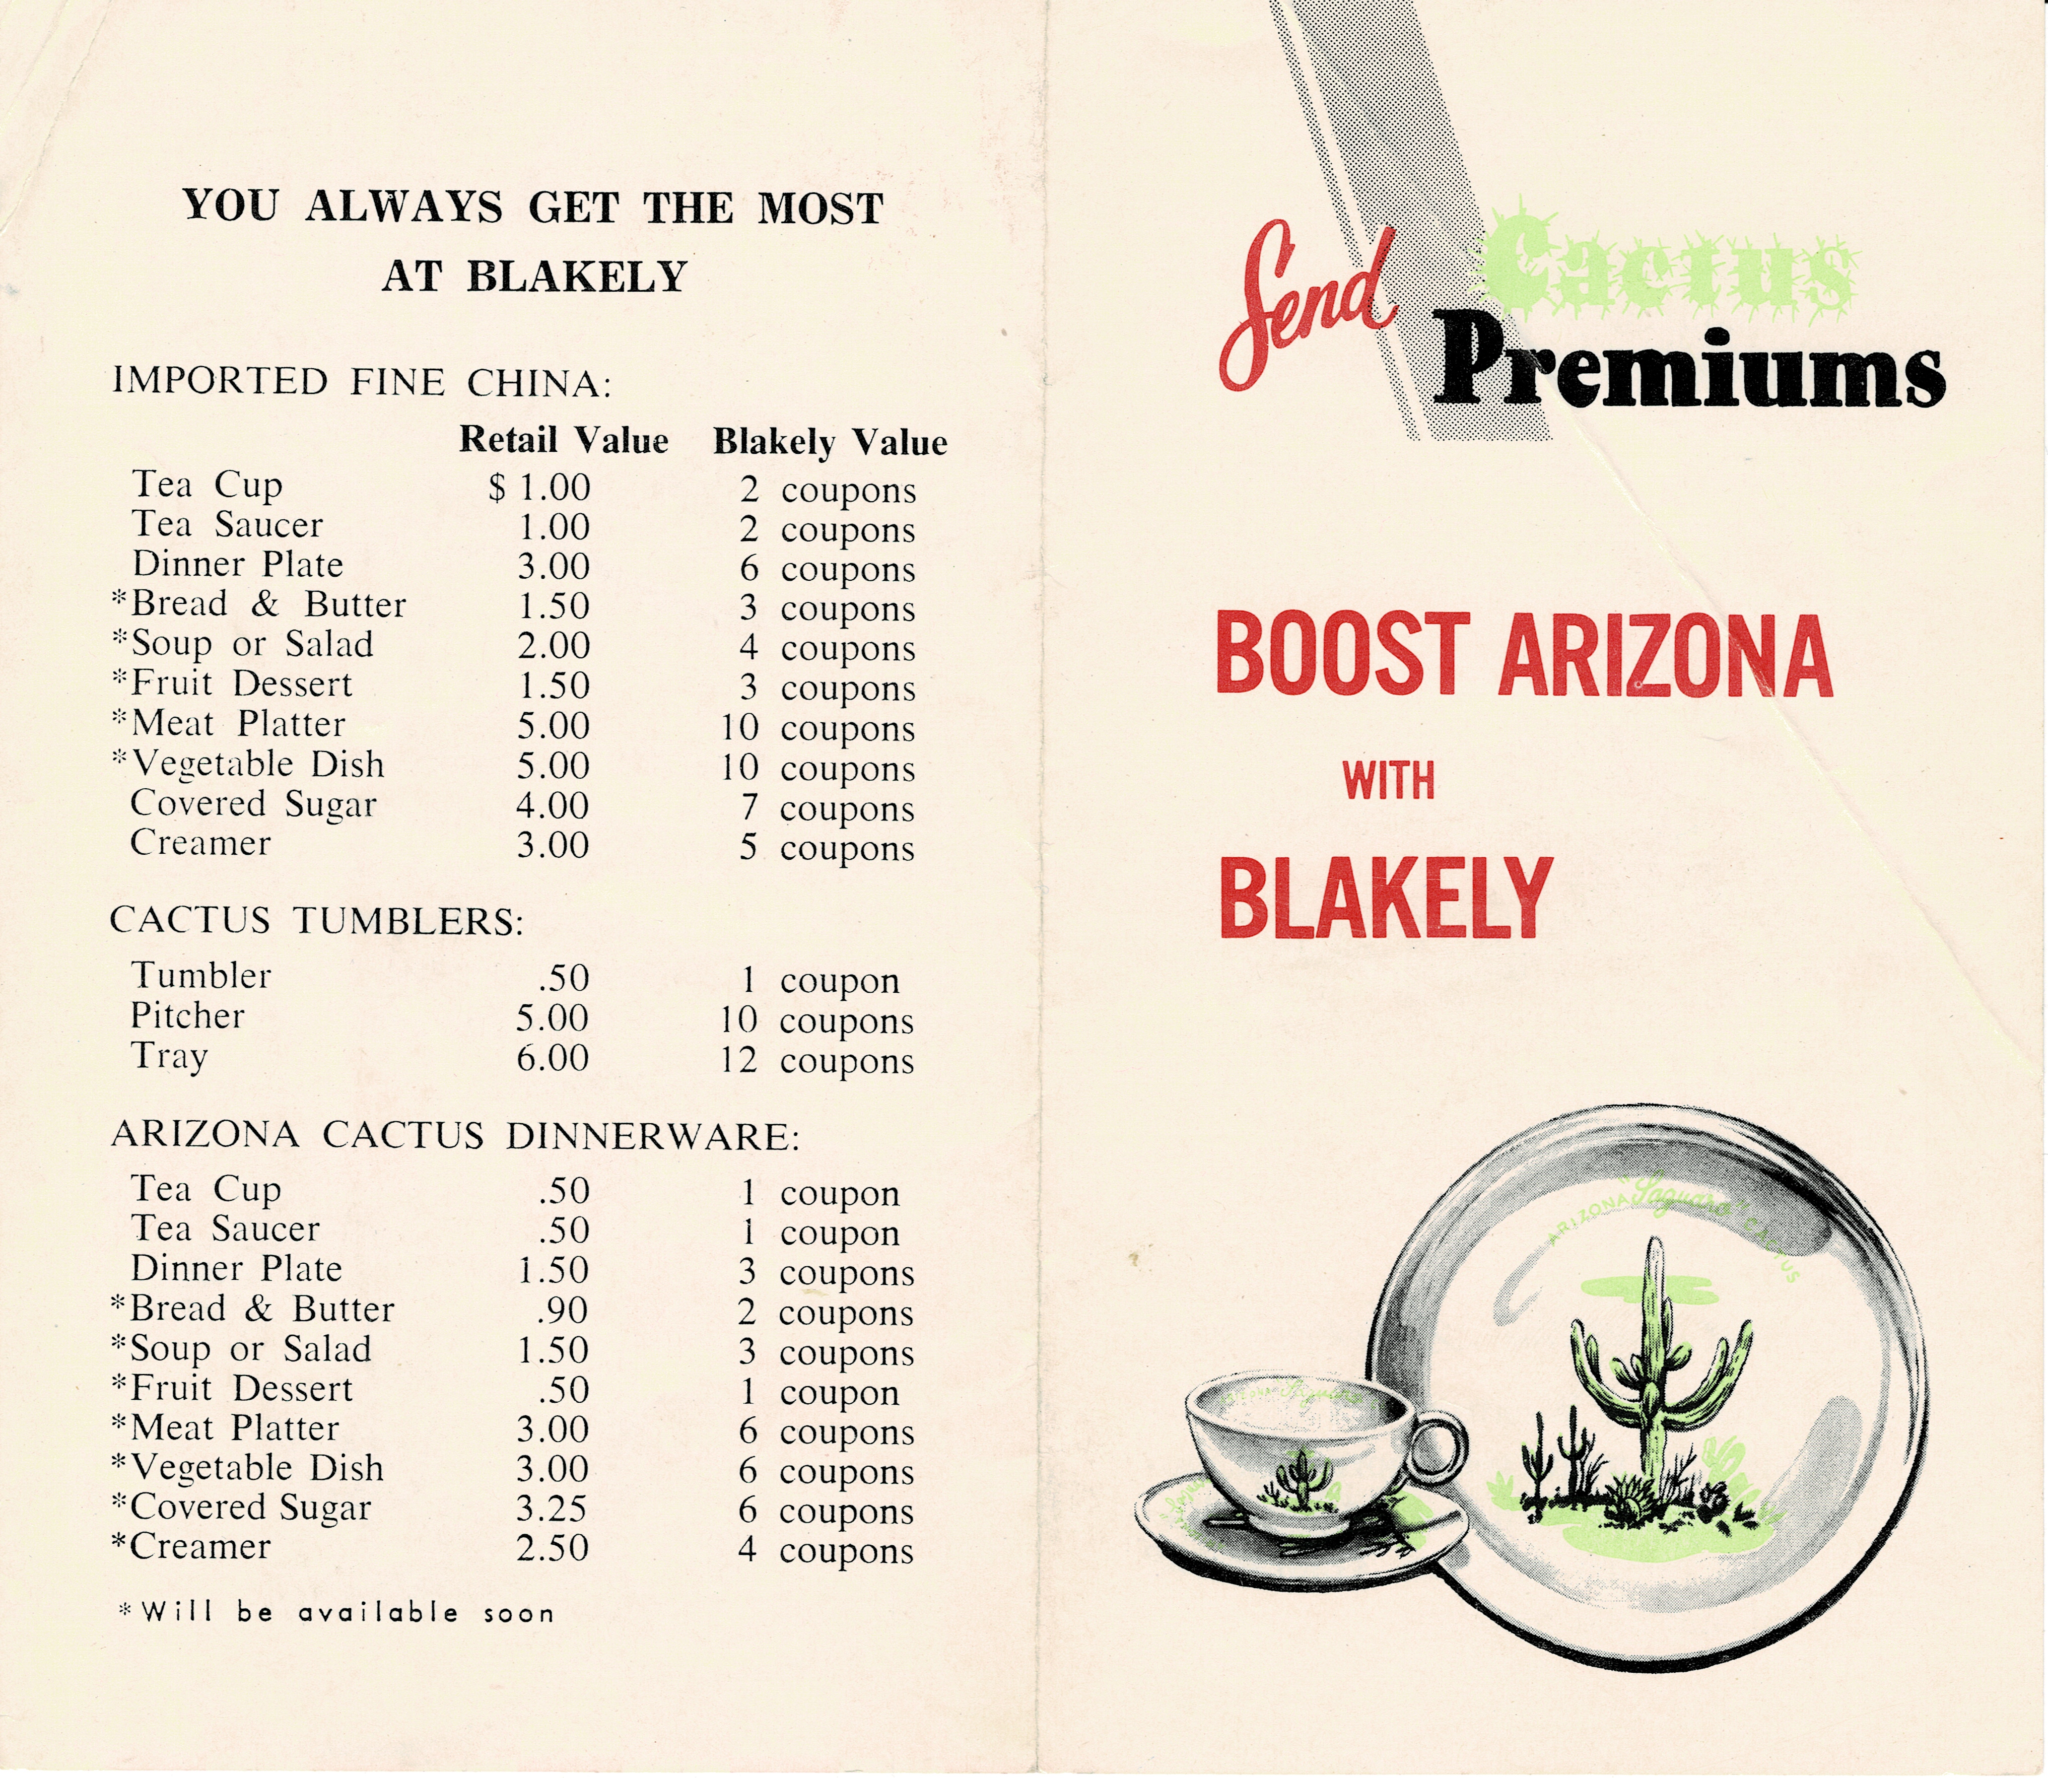 Blakely Gas Station Cactus Premiums